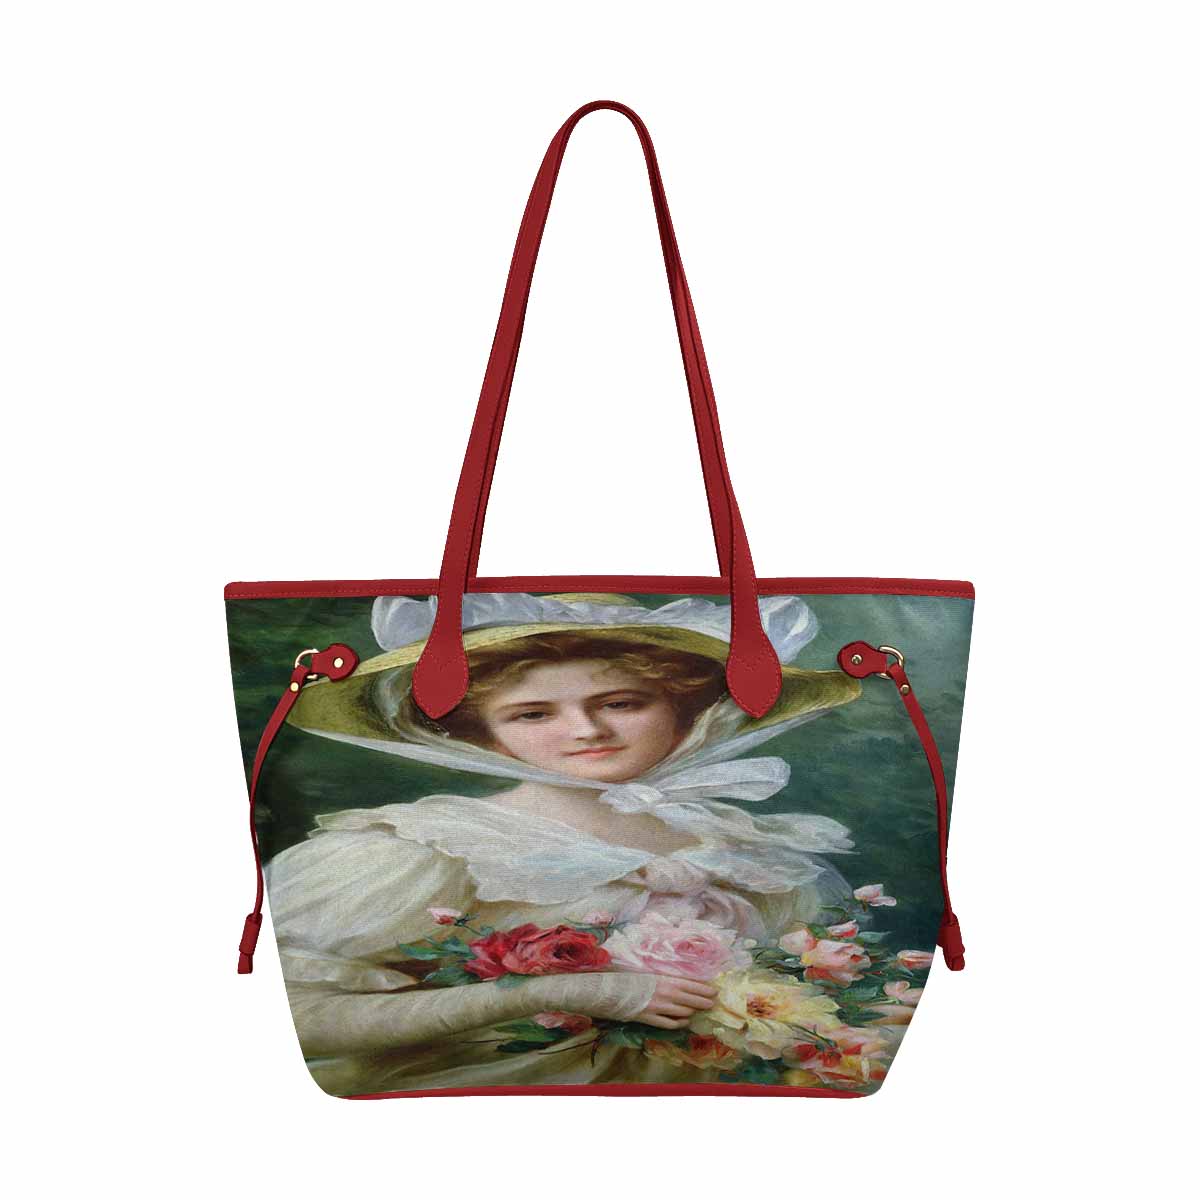 Victorian Lady Design Handbag, Model 1695361, Elegant Lady With A Bouquet of Roses 1, RED TRIM